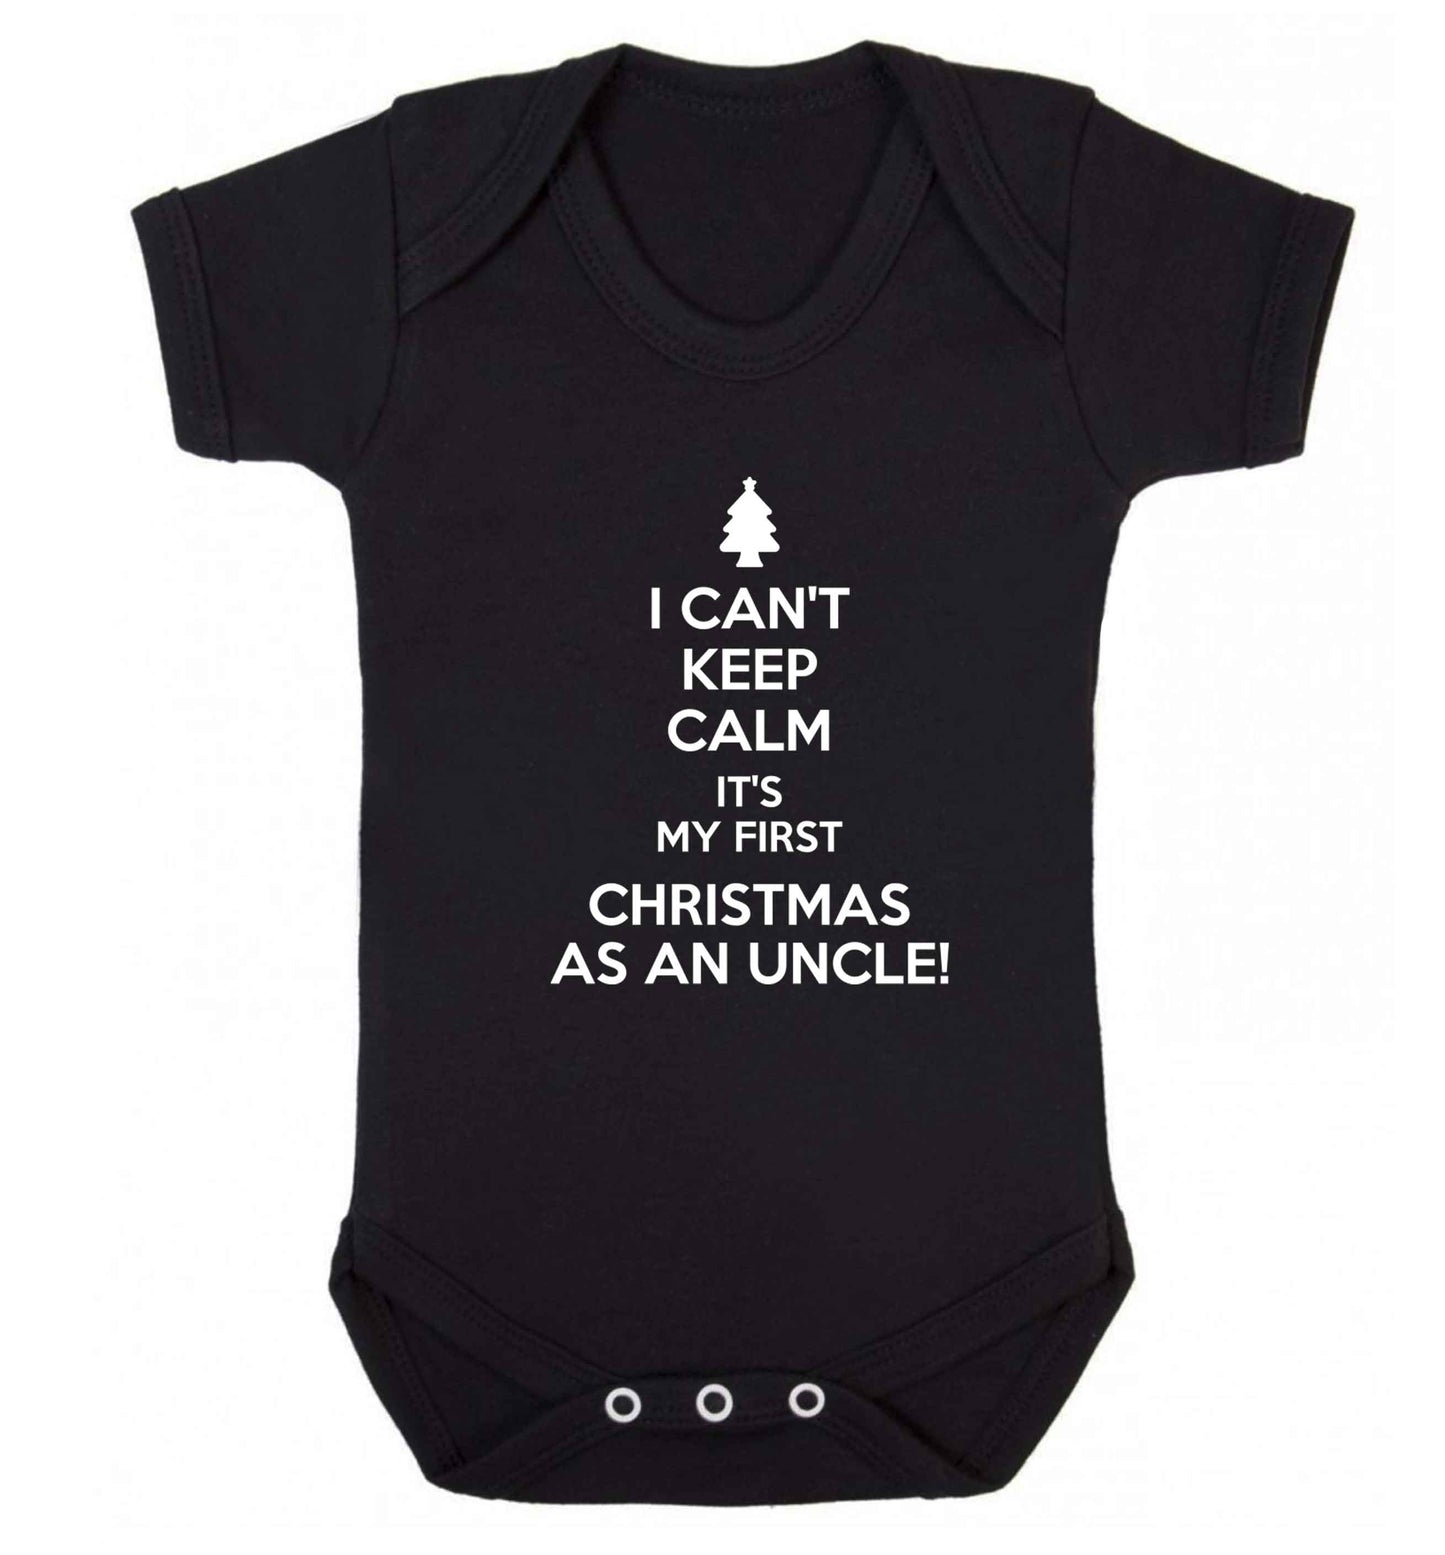 I can't keep calm it's my first Christmas as an uncle! Baby Vest black 18-24 months